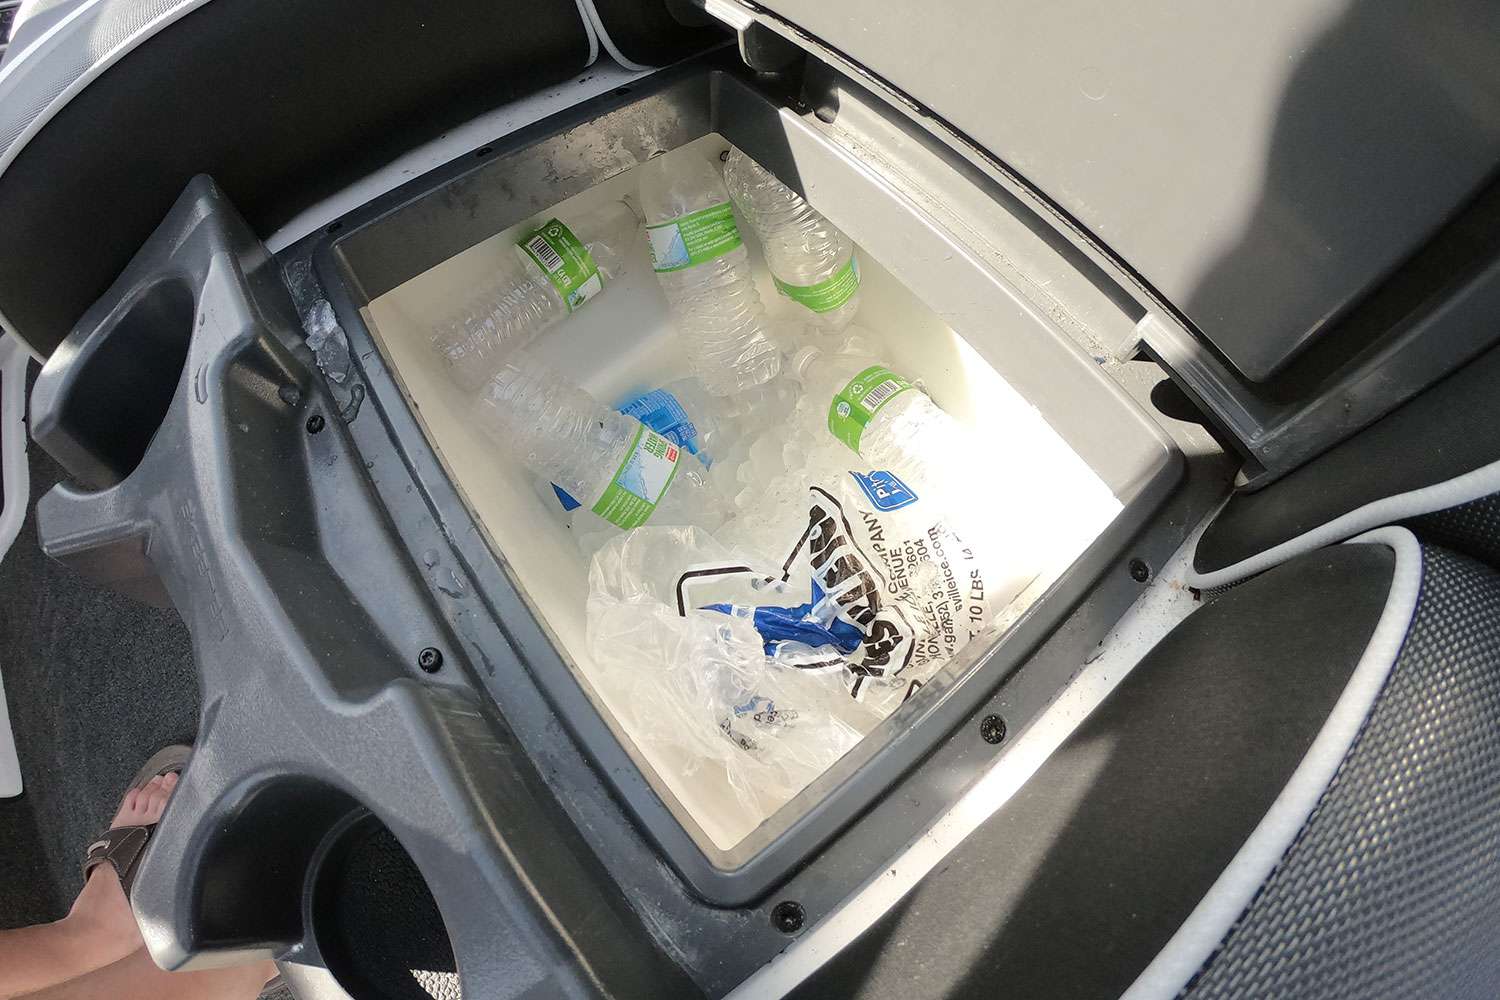 His cockpit console holds his cooler, which is full of cold drinks and food. 